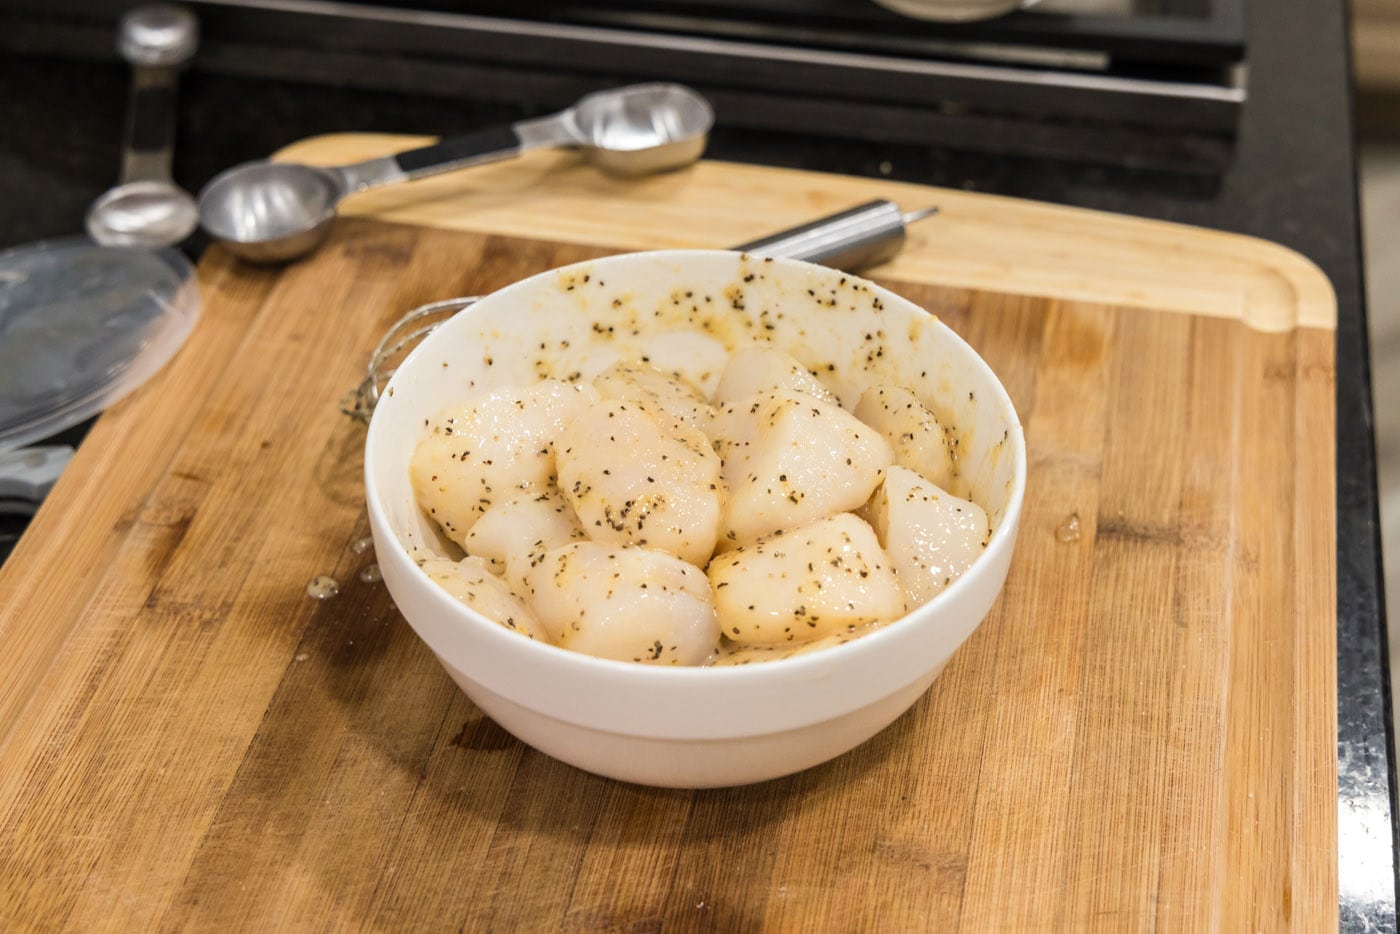 scallops in a bowl with butter mixture